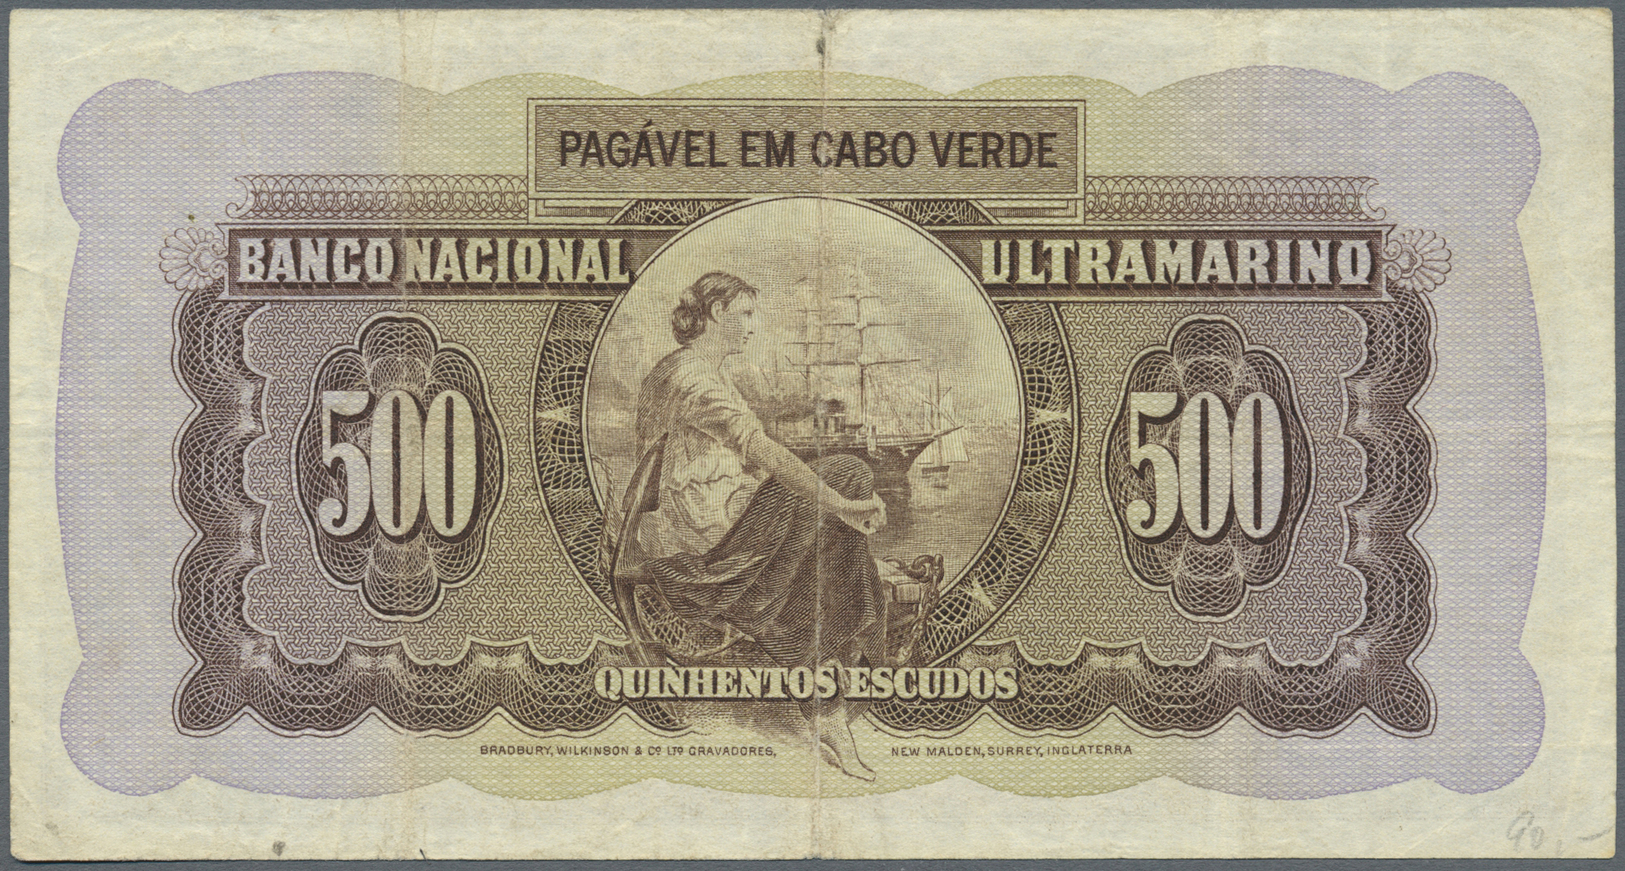 00500 Cape Verde / Kap Verde: 500 Escudos 1958 P. 50 In Used Condition With Several Folds But Without Holes Or Tears, St - Cape Verde